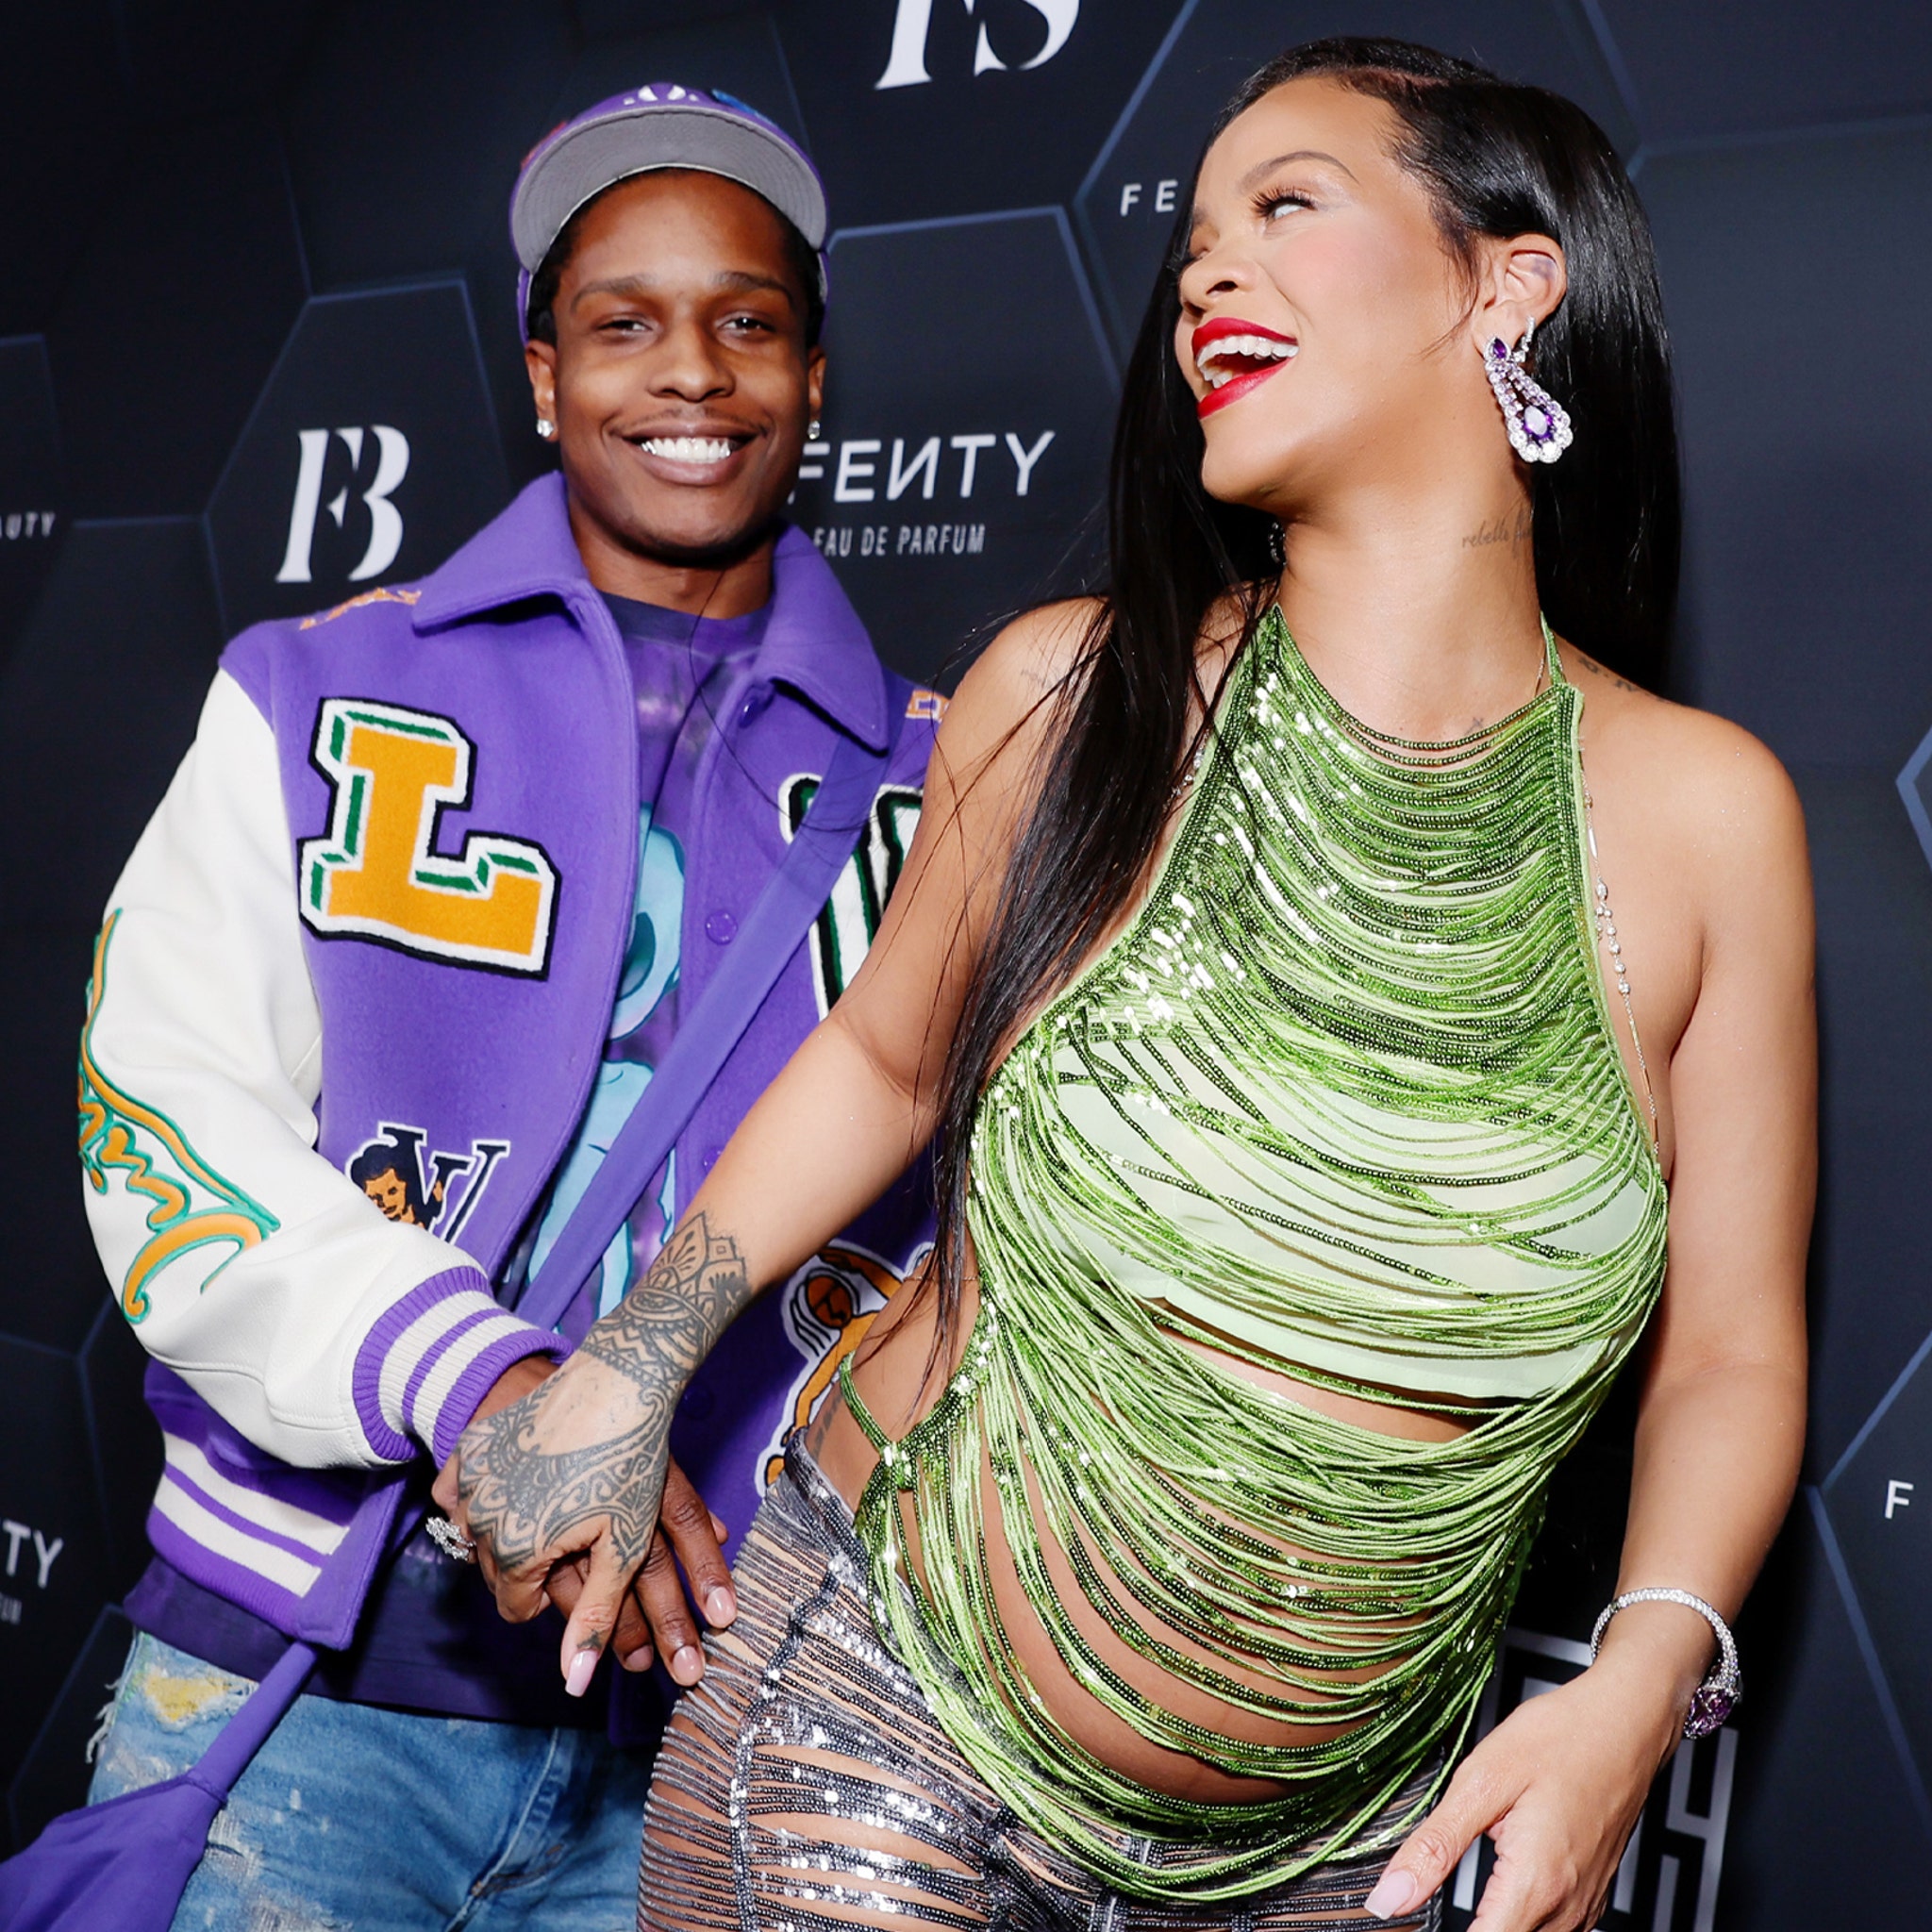 Rihanna and A$AP Rocky Both Share a Connection to Barbados